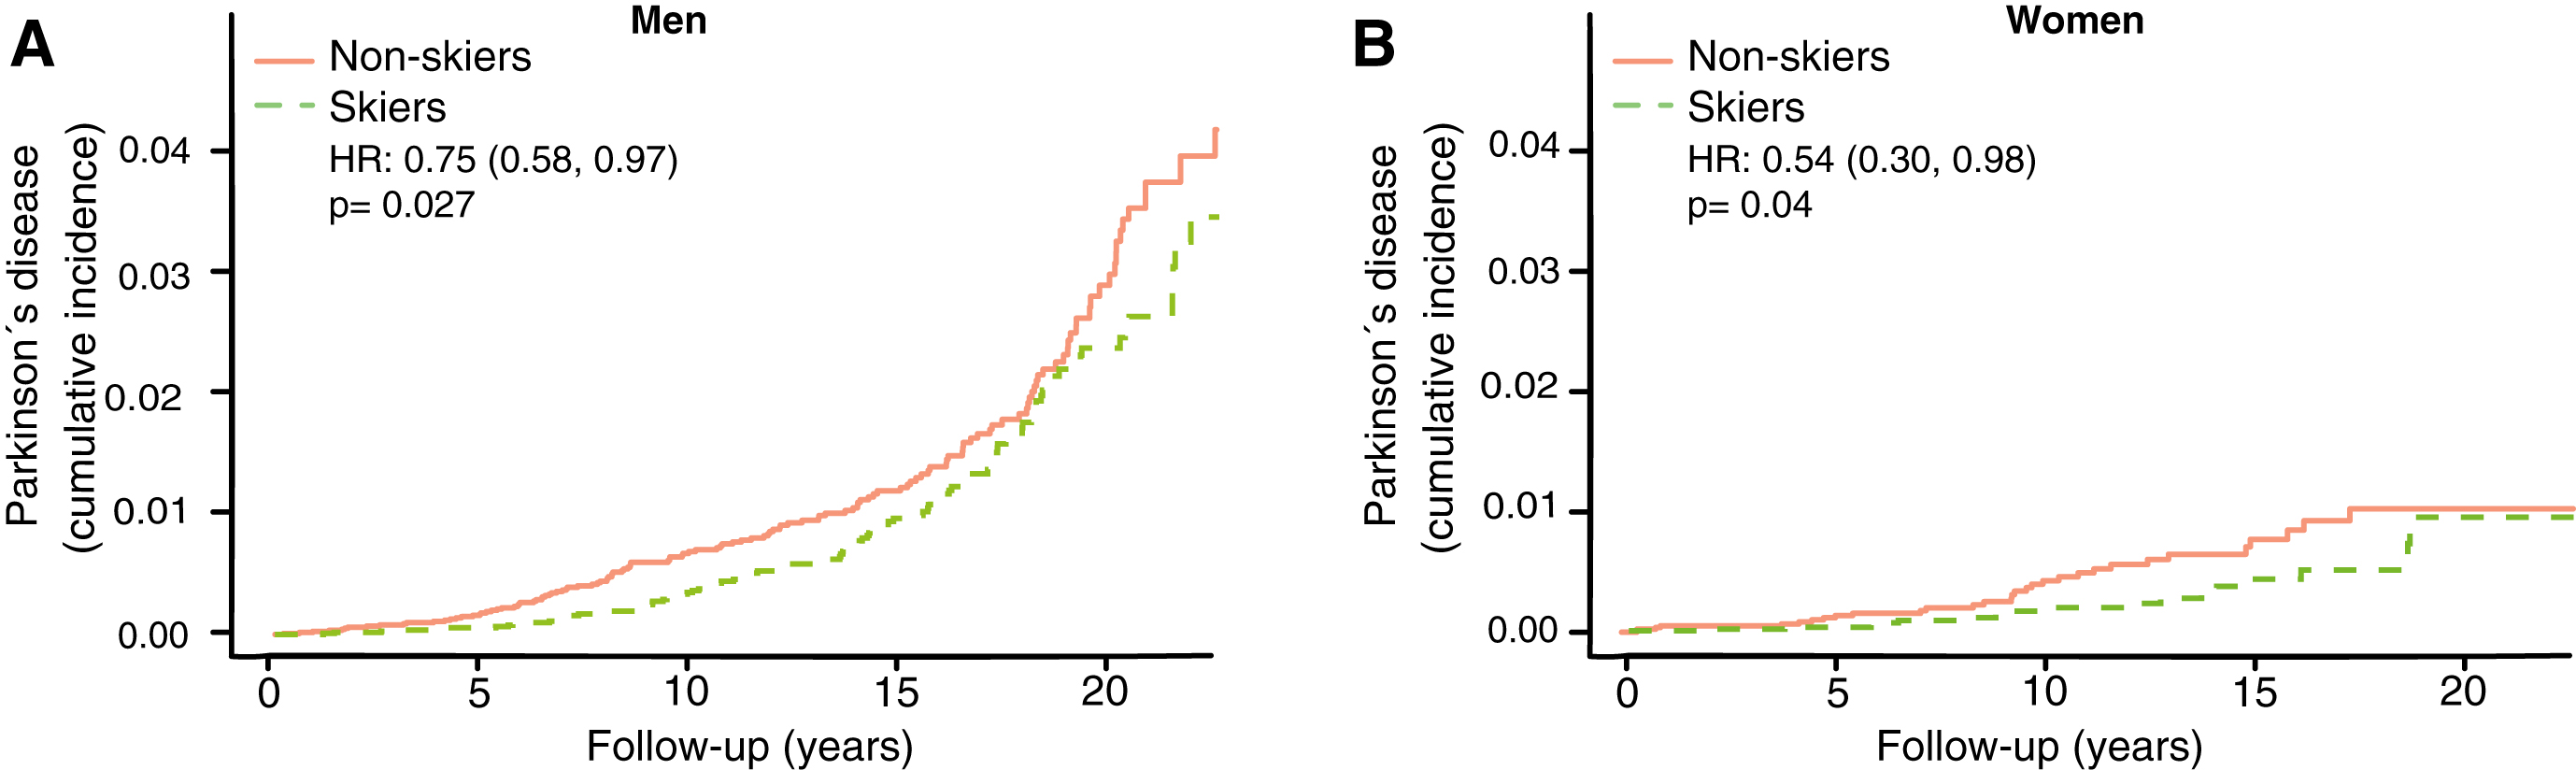 Cumulative incidence of Parkinson’s disease among skiers vs. non-skiers in men (A) and women (B) separately. HR represents hazard ratios from an unadjusted cox regression.